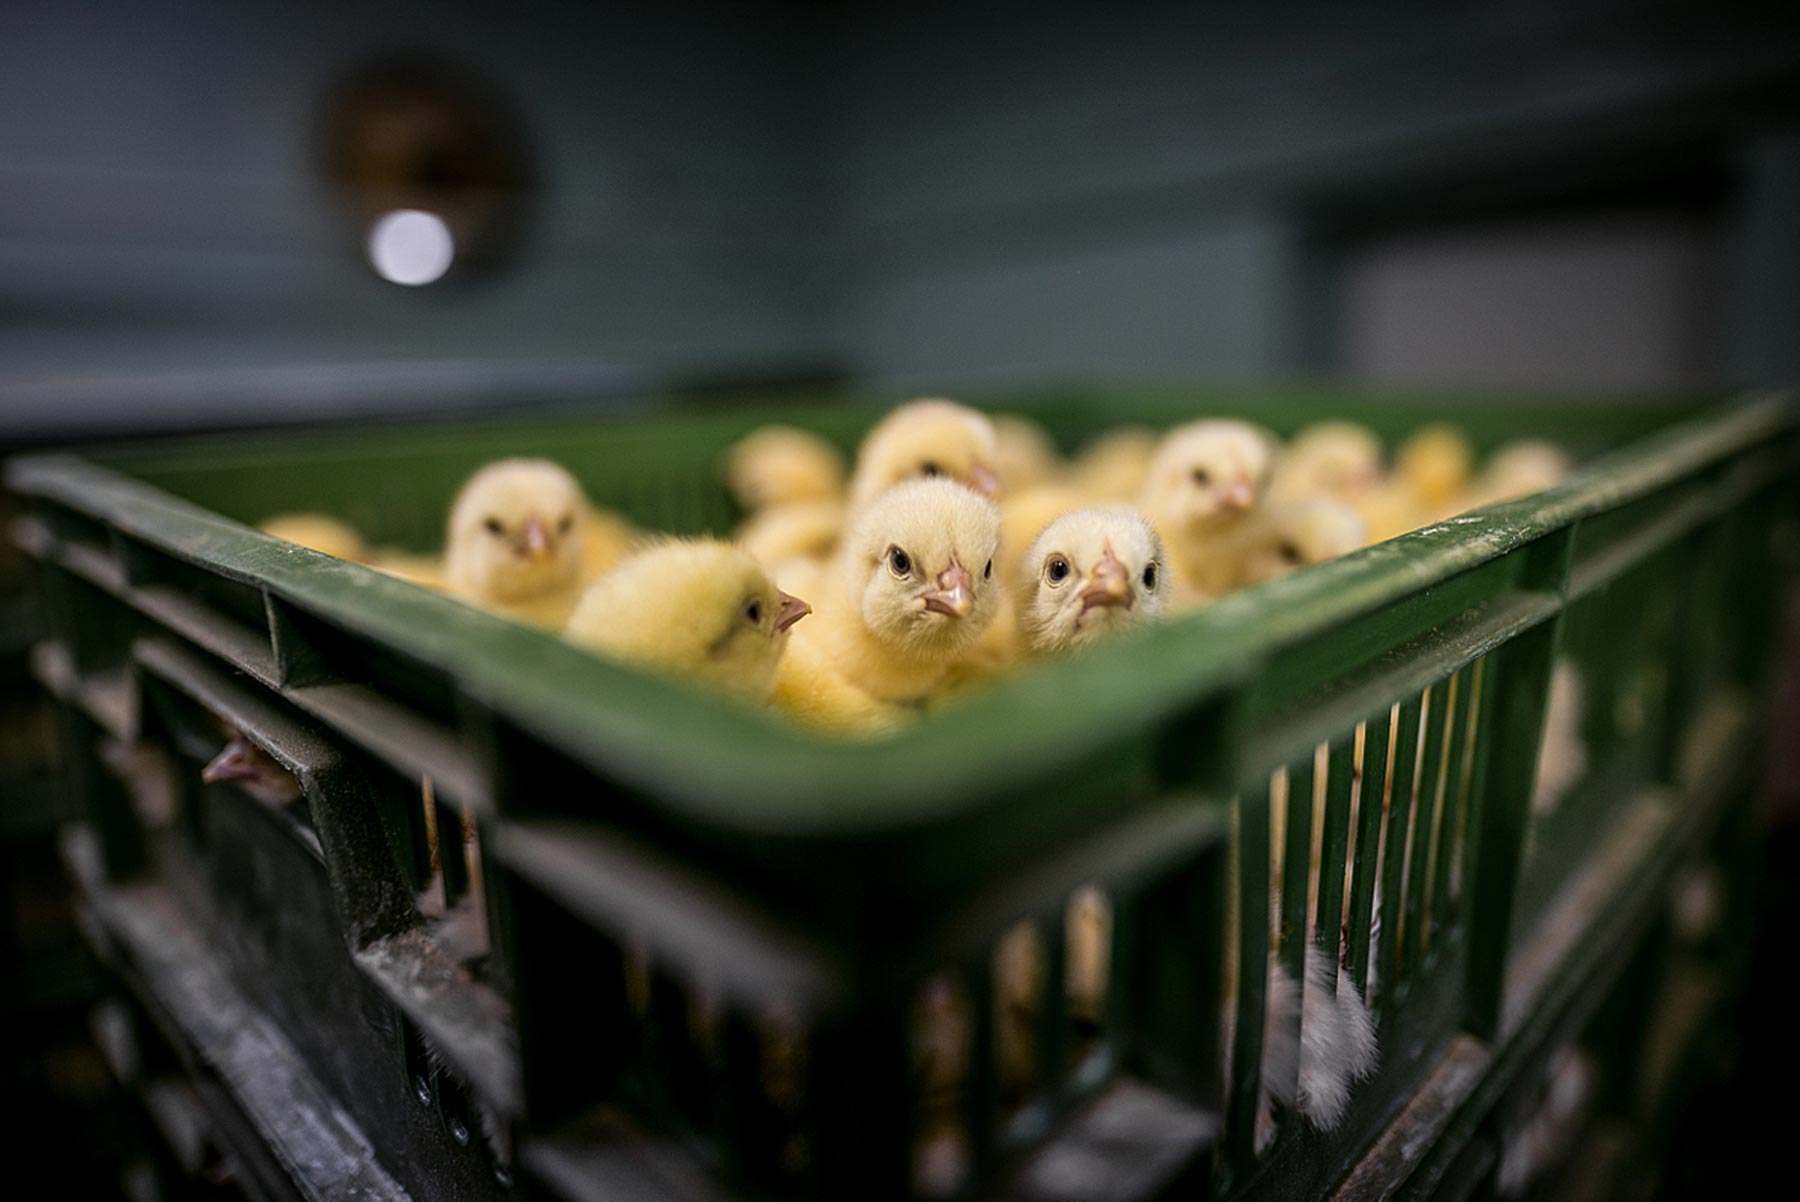 Day-old chicks are packed into crates at an industrial hatchery.